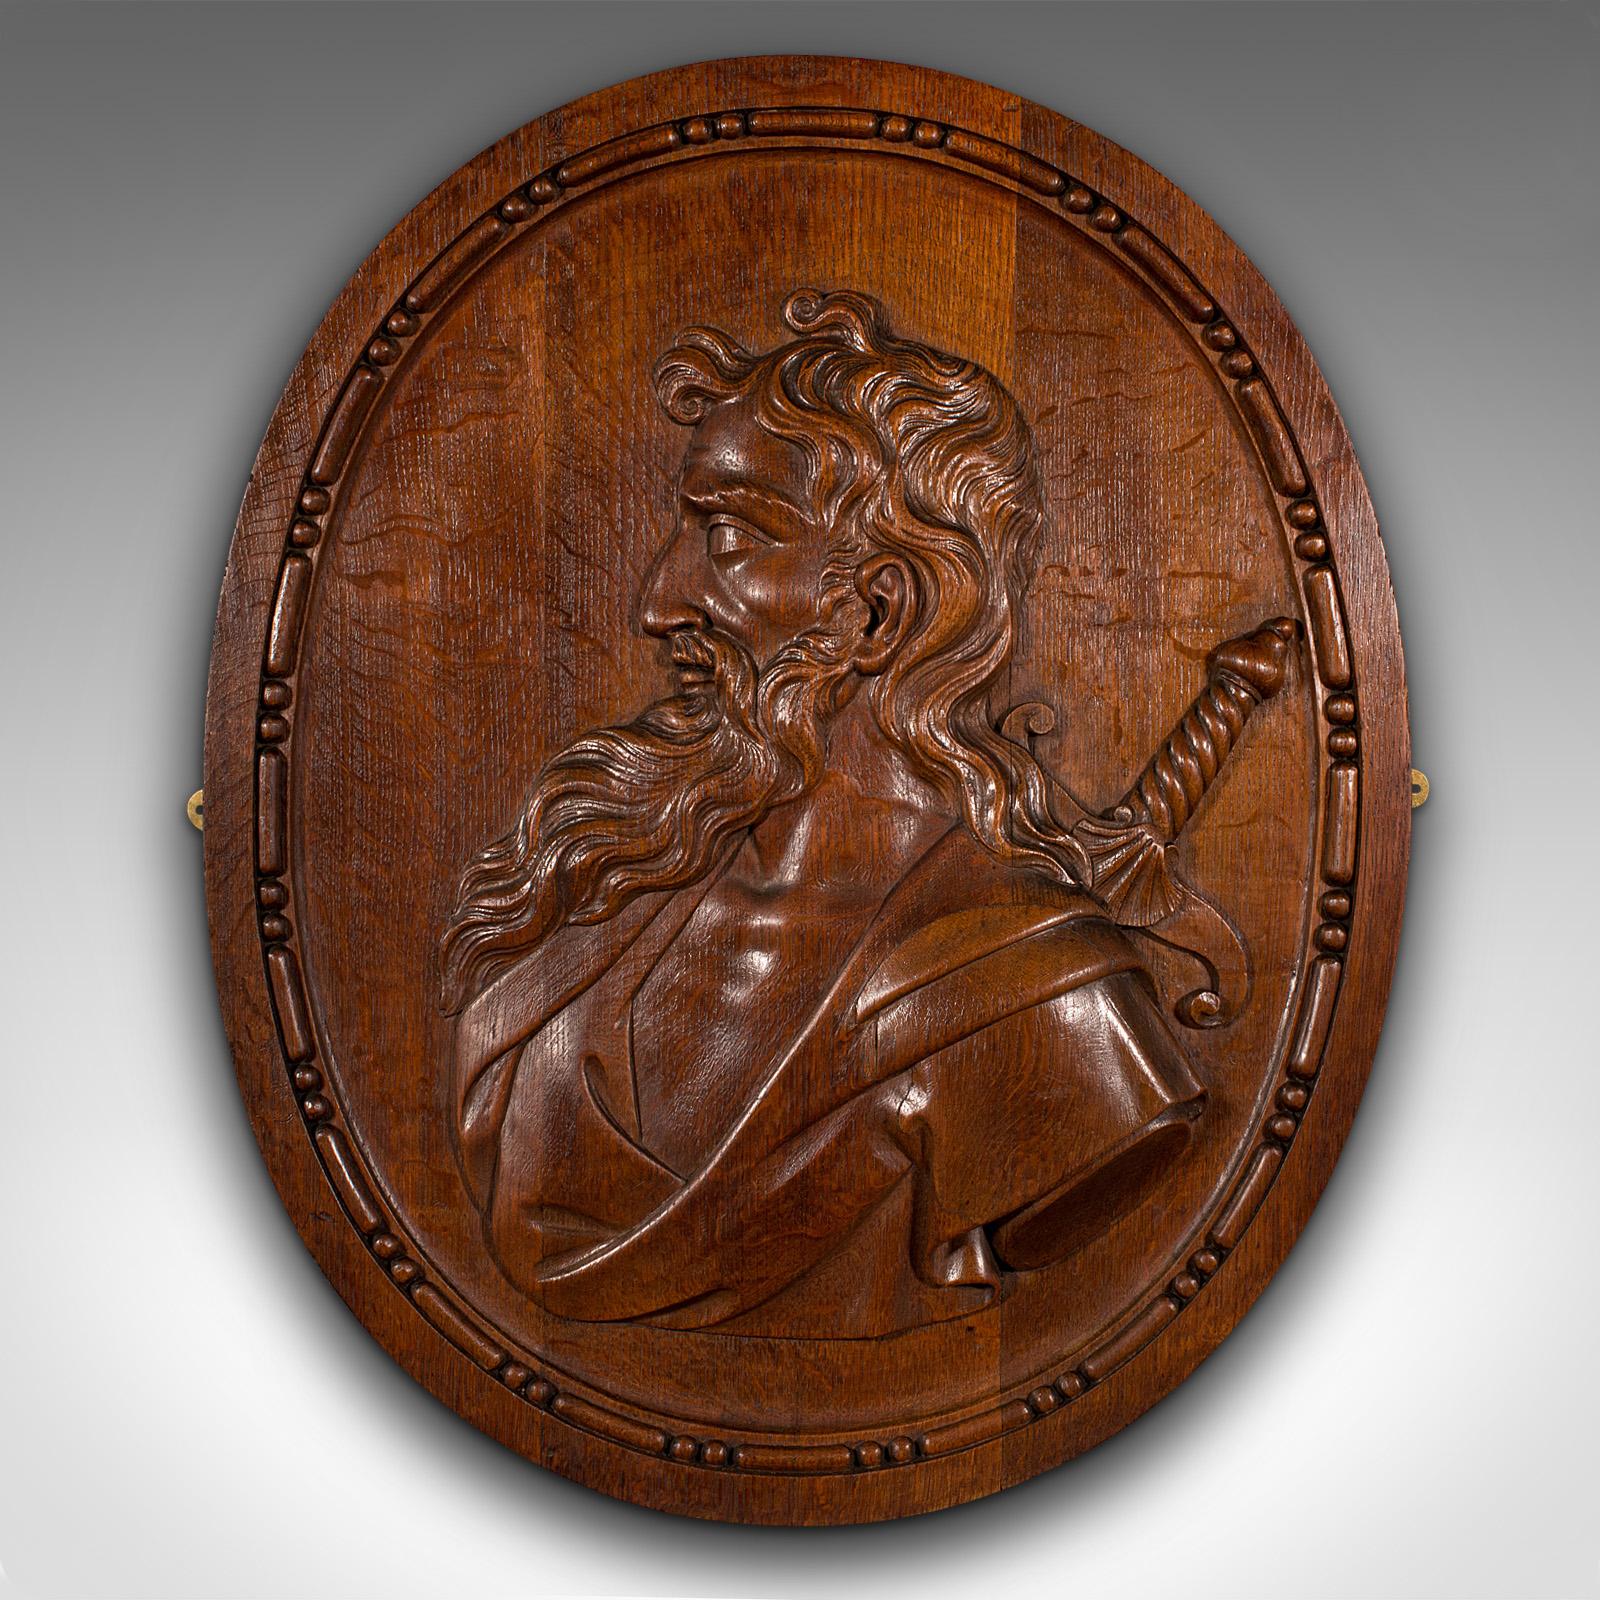 This is a large antique carved portrait. An Italian, oak decorative relief panel, dating to the late Victorian period, circa 1900.

Of superb proportion and wonderful craftsmanship
Displays a desirable aged patina and in good order
Select oak stocks